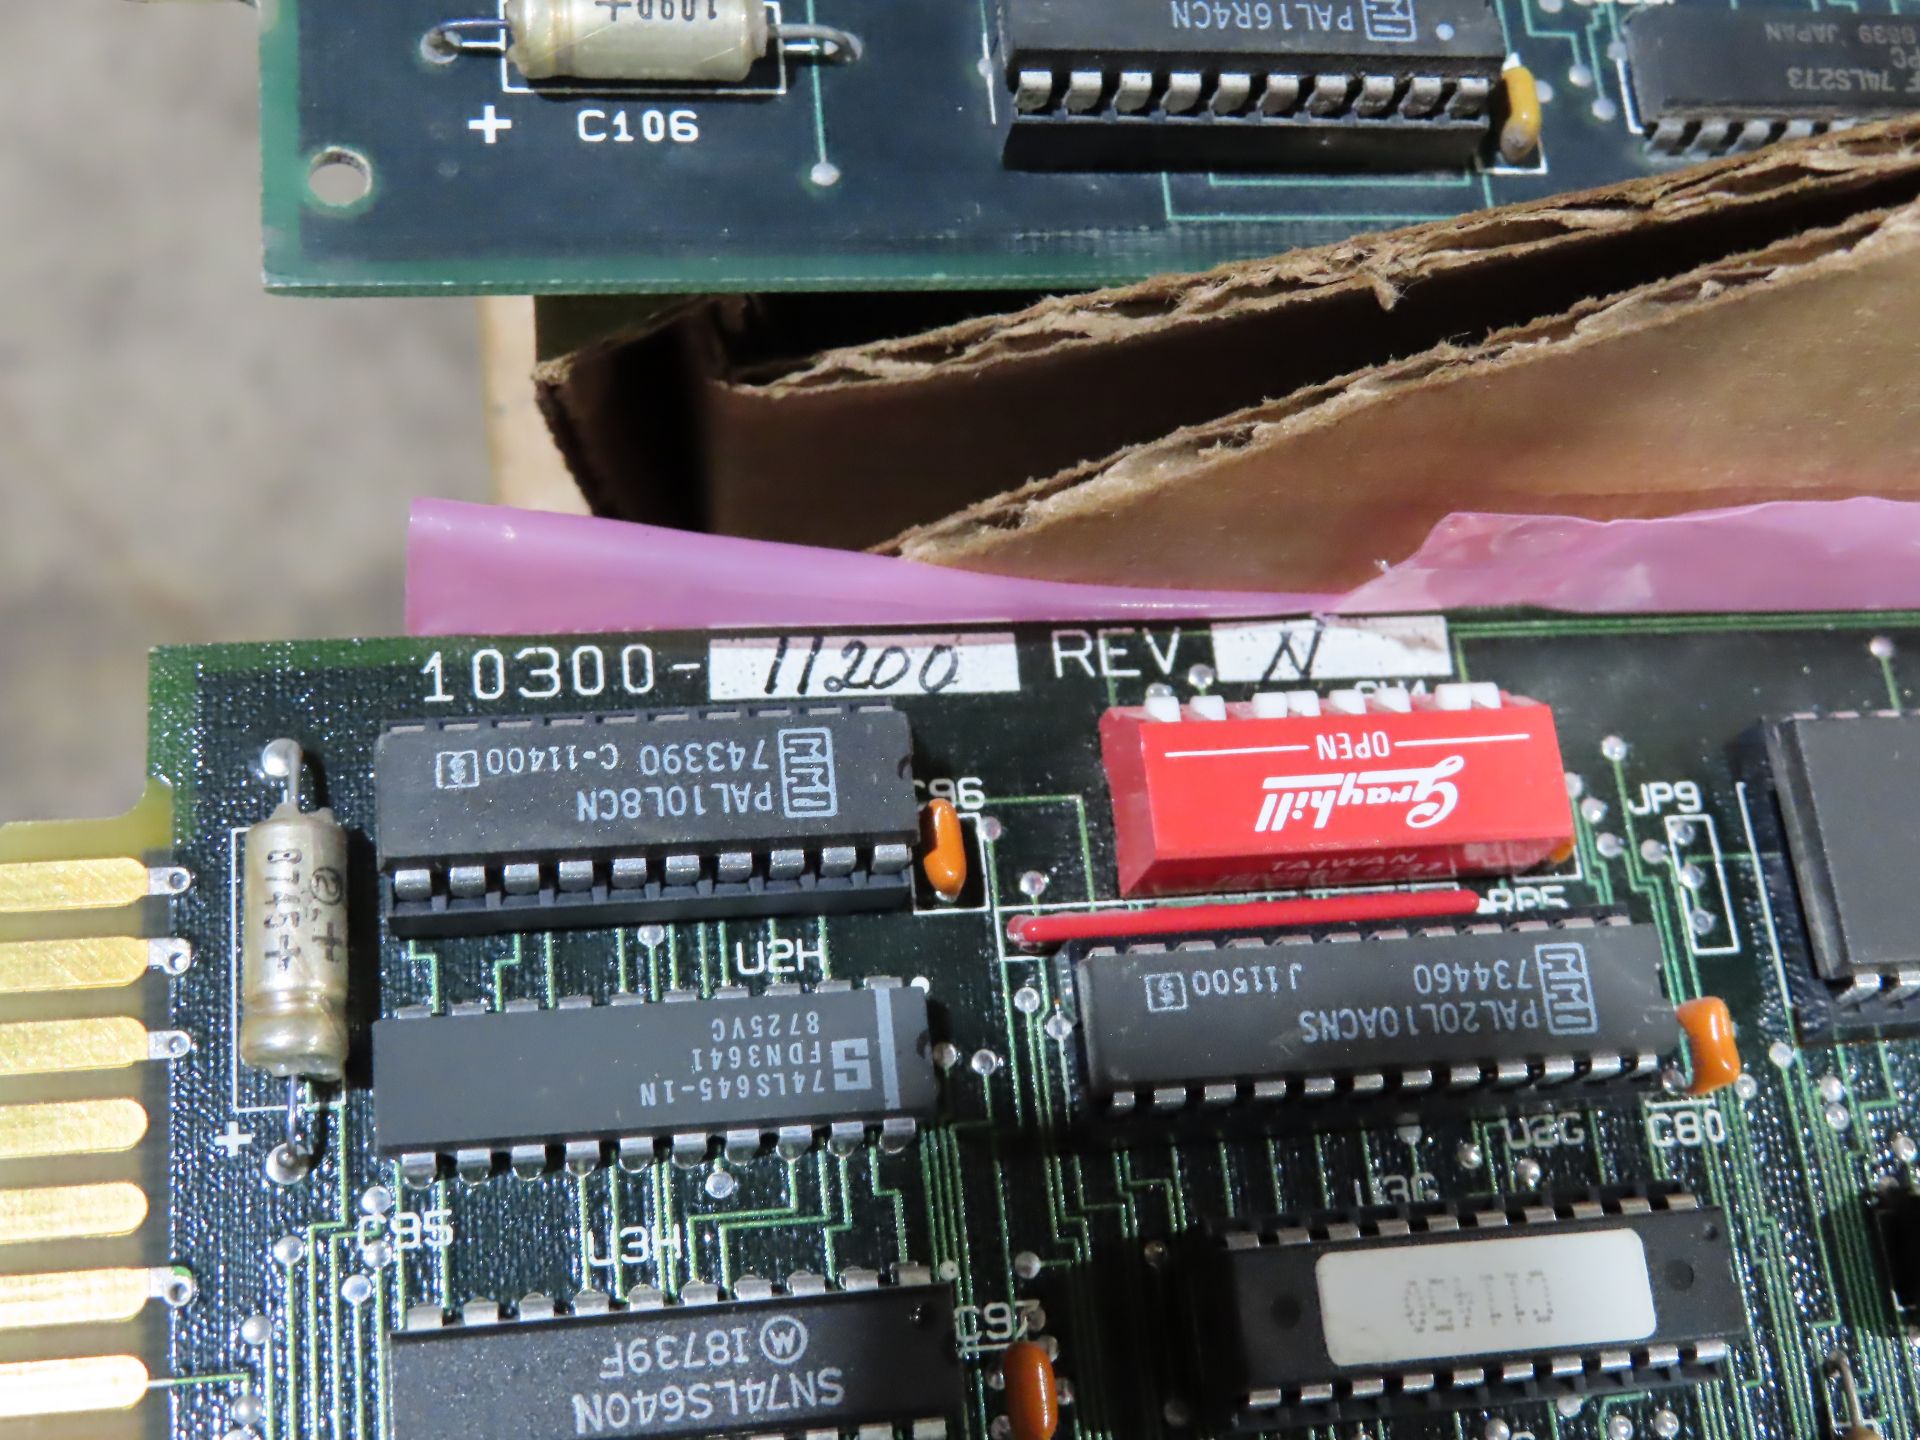 Adept part number 10300-11200 rev N joint interface board, as always, with Brolyn LLC auctions, - Image 2 of 2